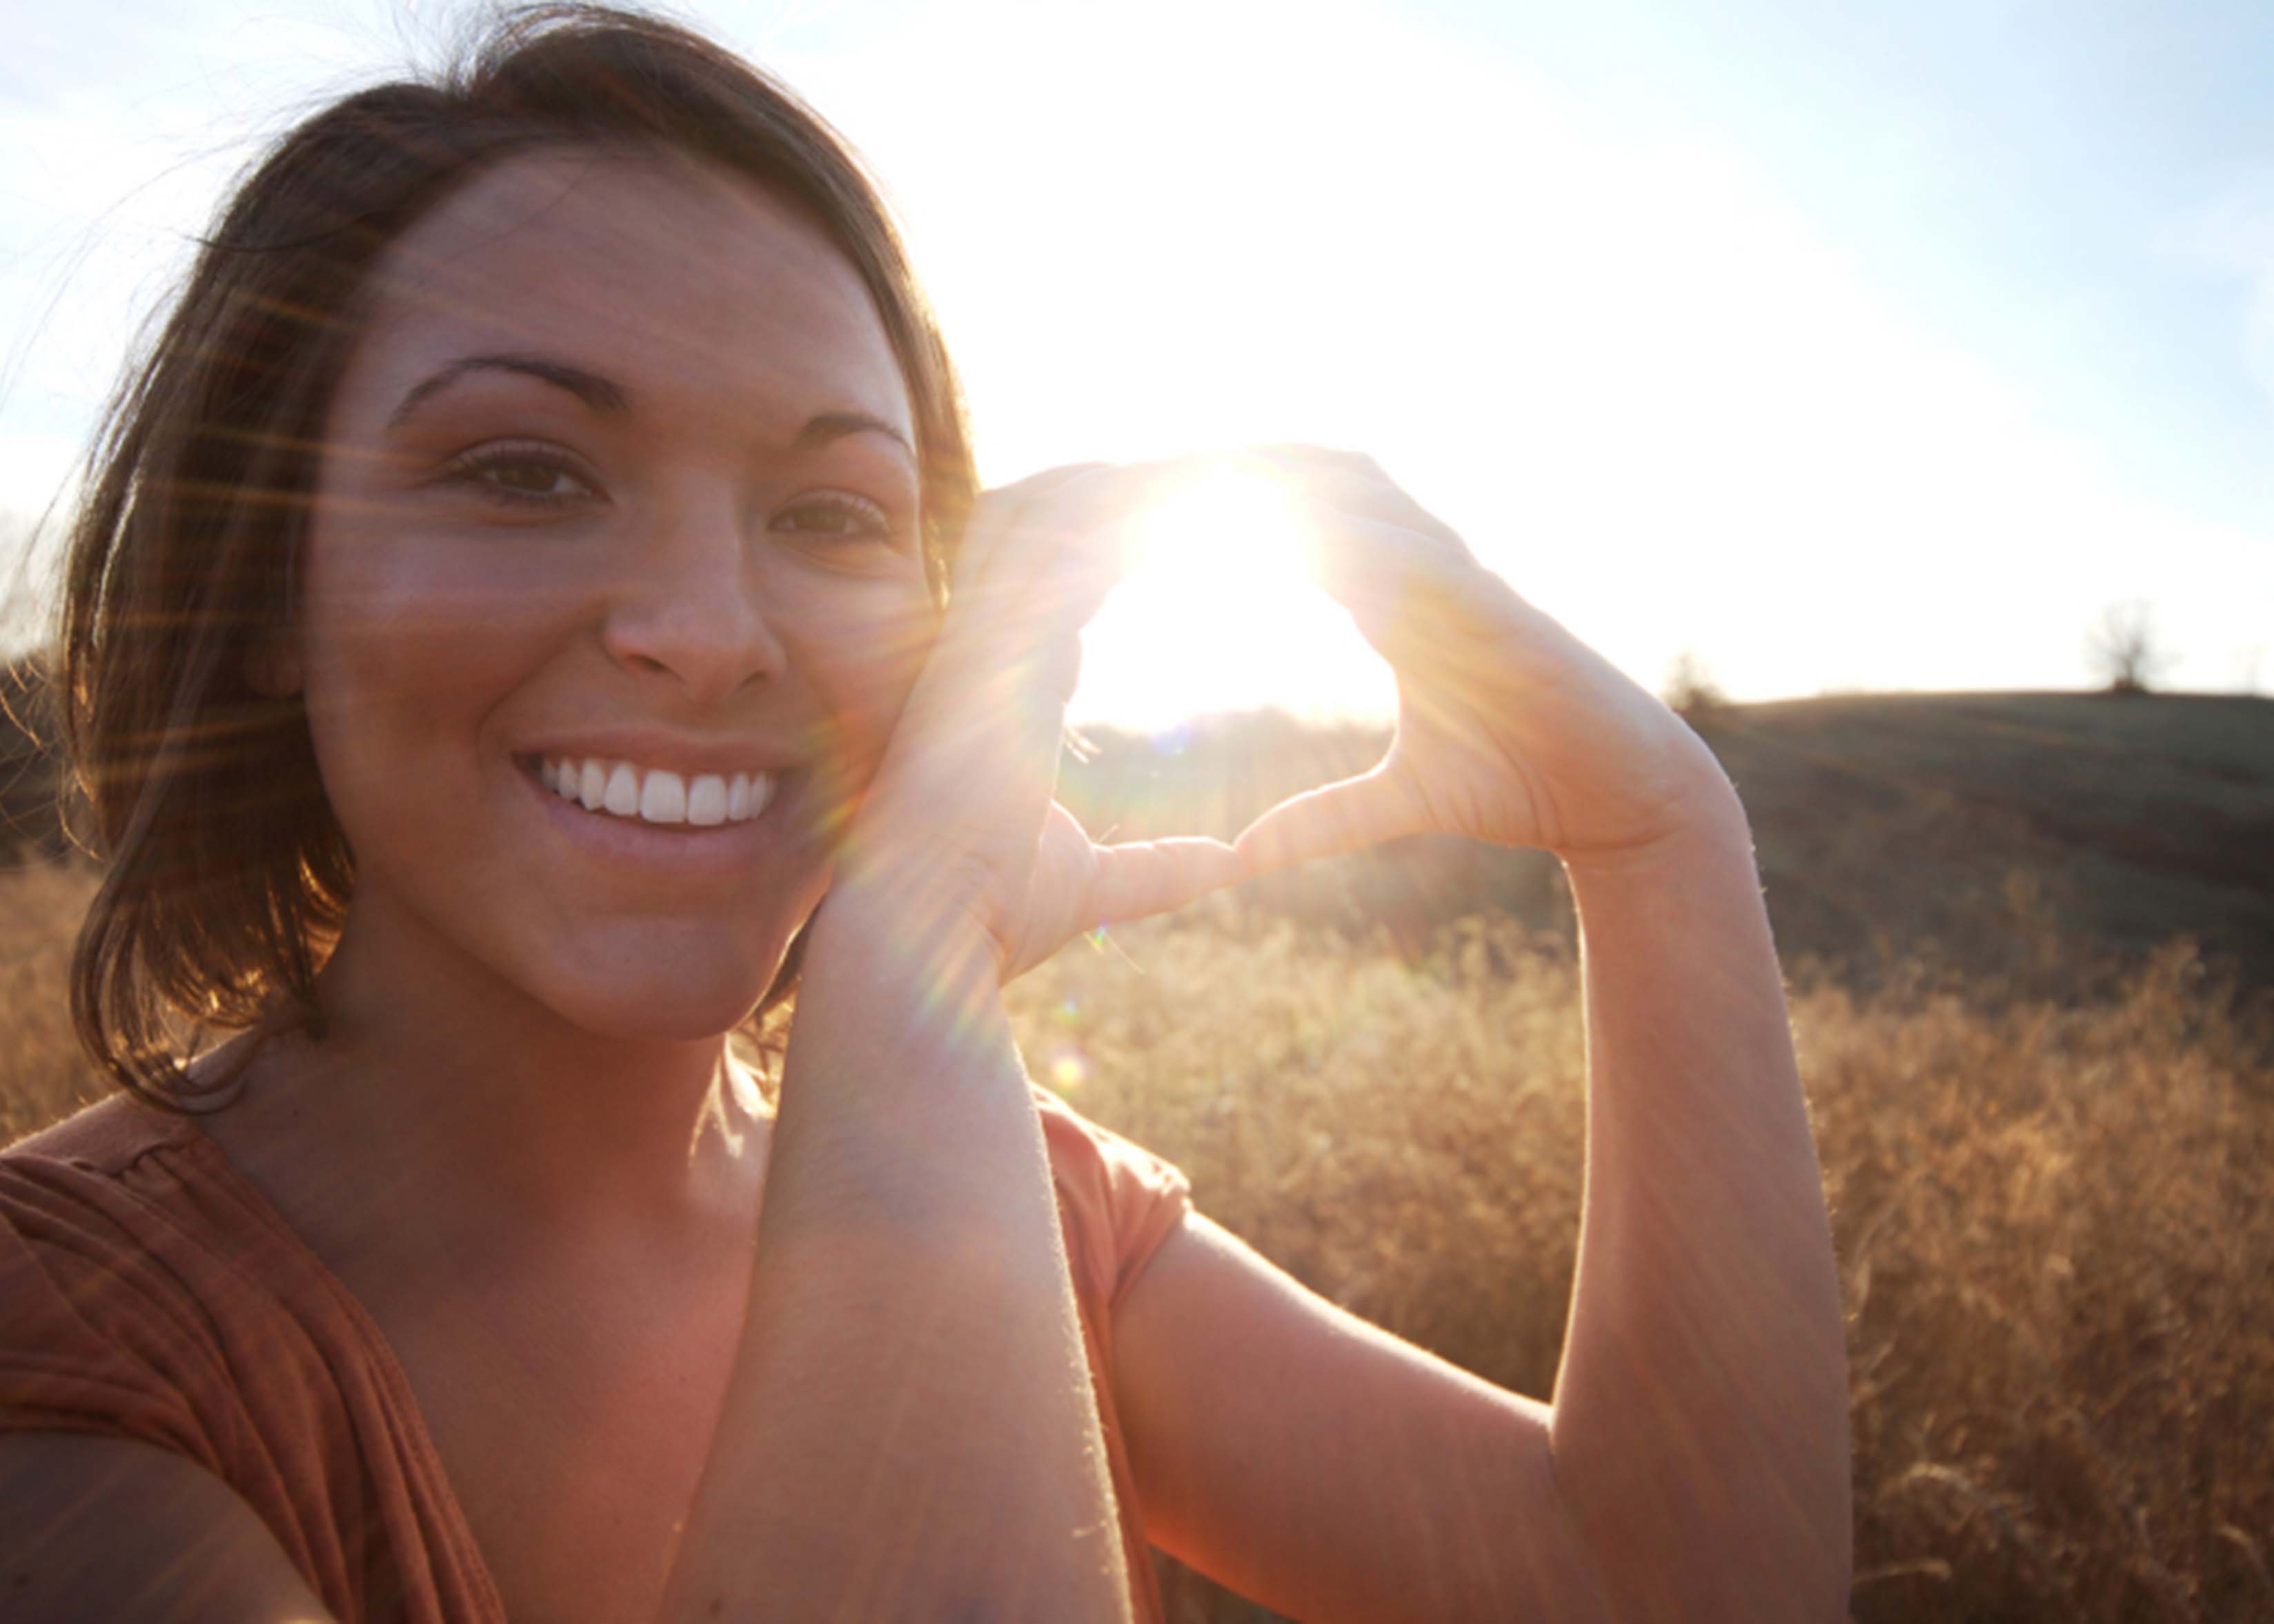 Young Native woman making a heart symbol with her hands in front of a sunset